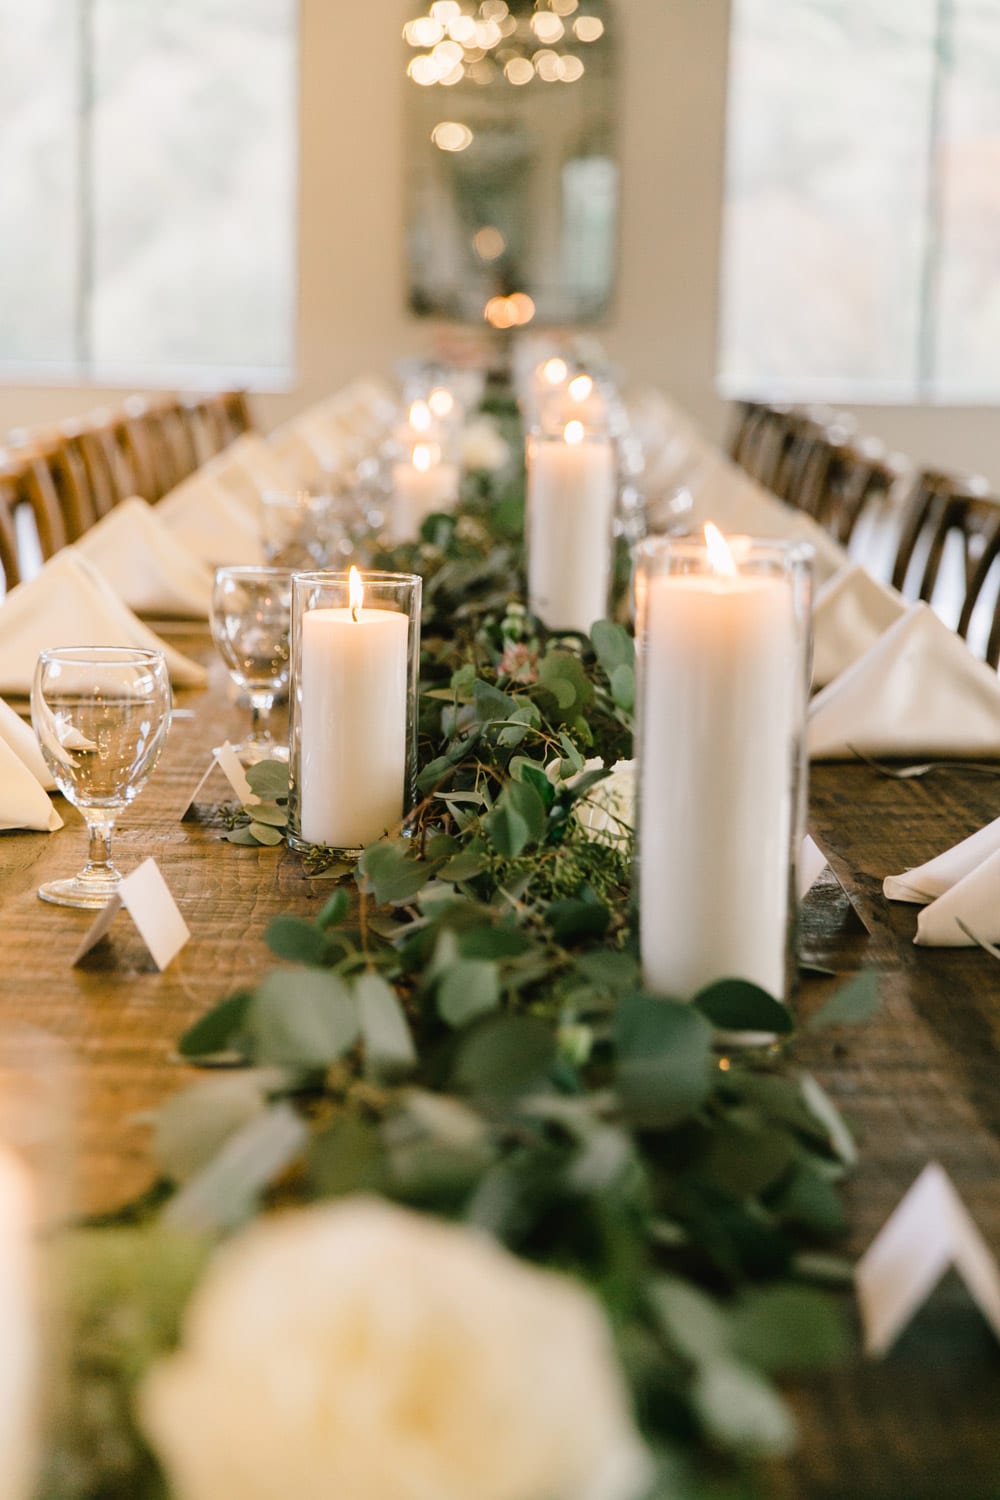 Estate table with candles and greenery